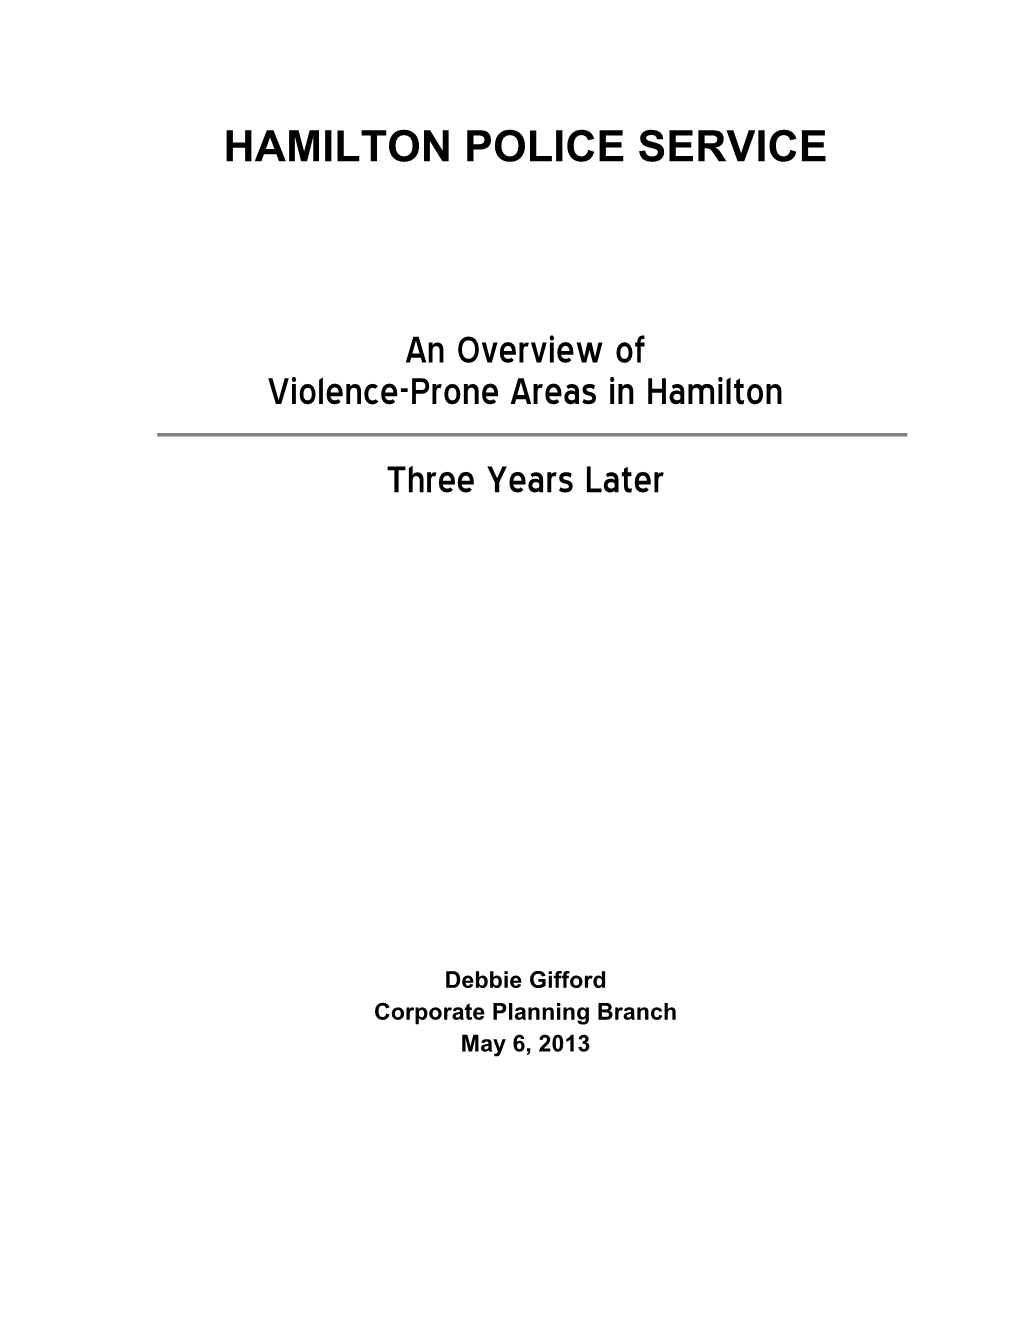 An Overview of Violence-Prone Areas in Hamilton Three Years Later